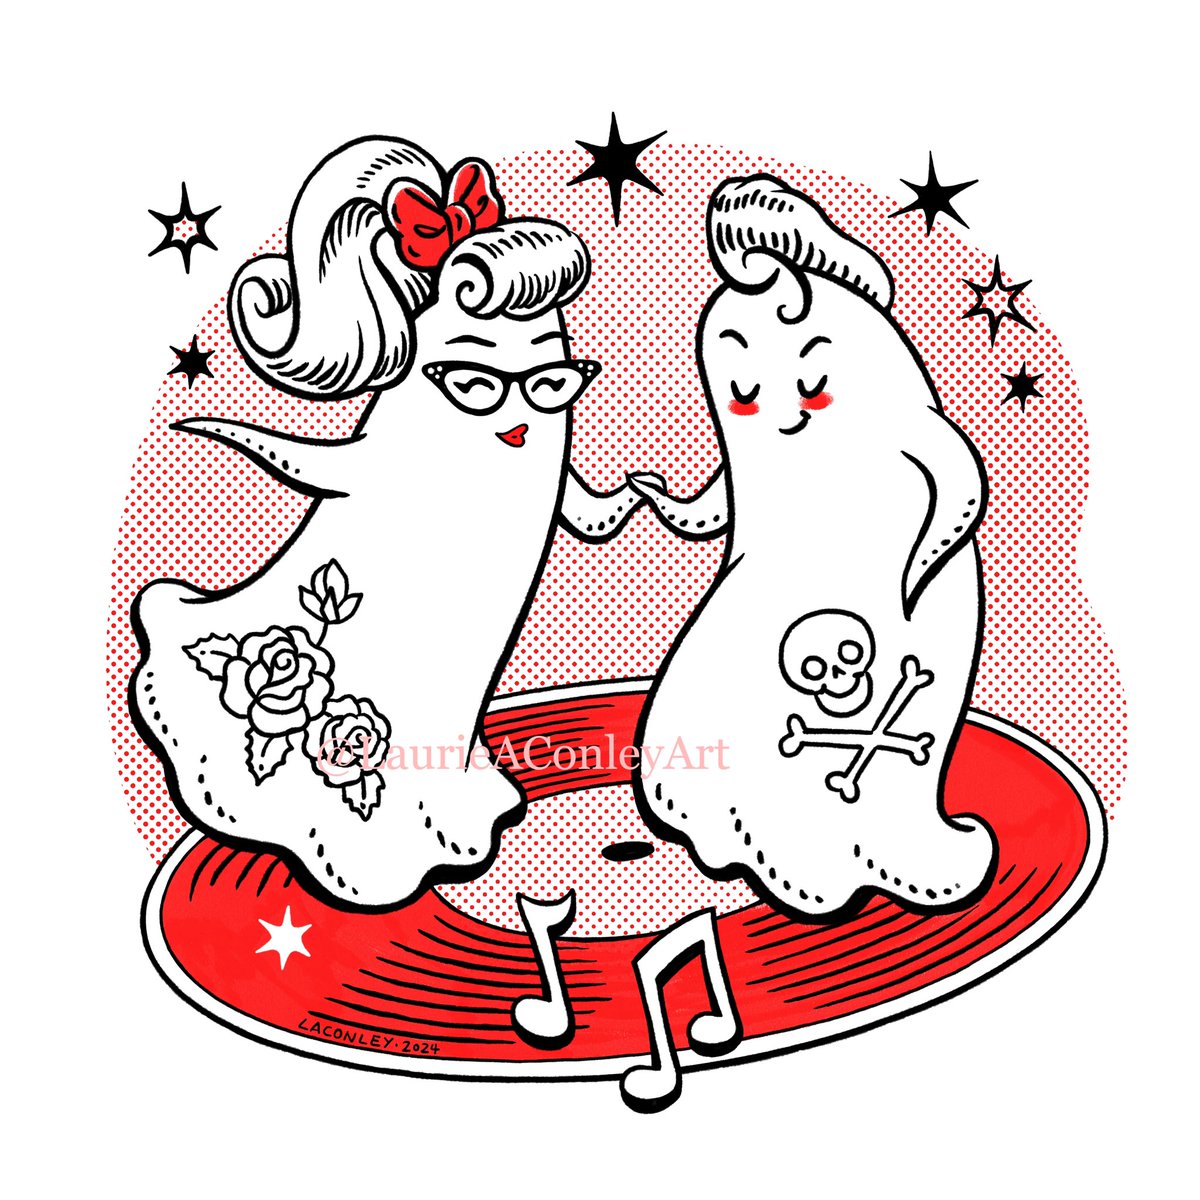 Last night I watched a documentary called “It’s A Rockabilly World”. Fun show! It inspired these rockabilly ghosts. I hope you like them. 🎸👻🔥